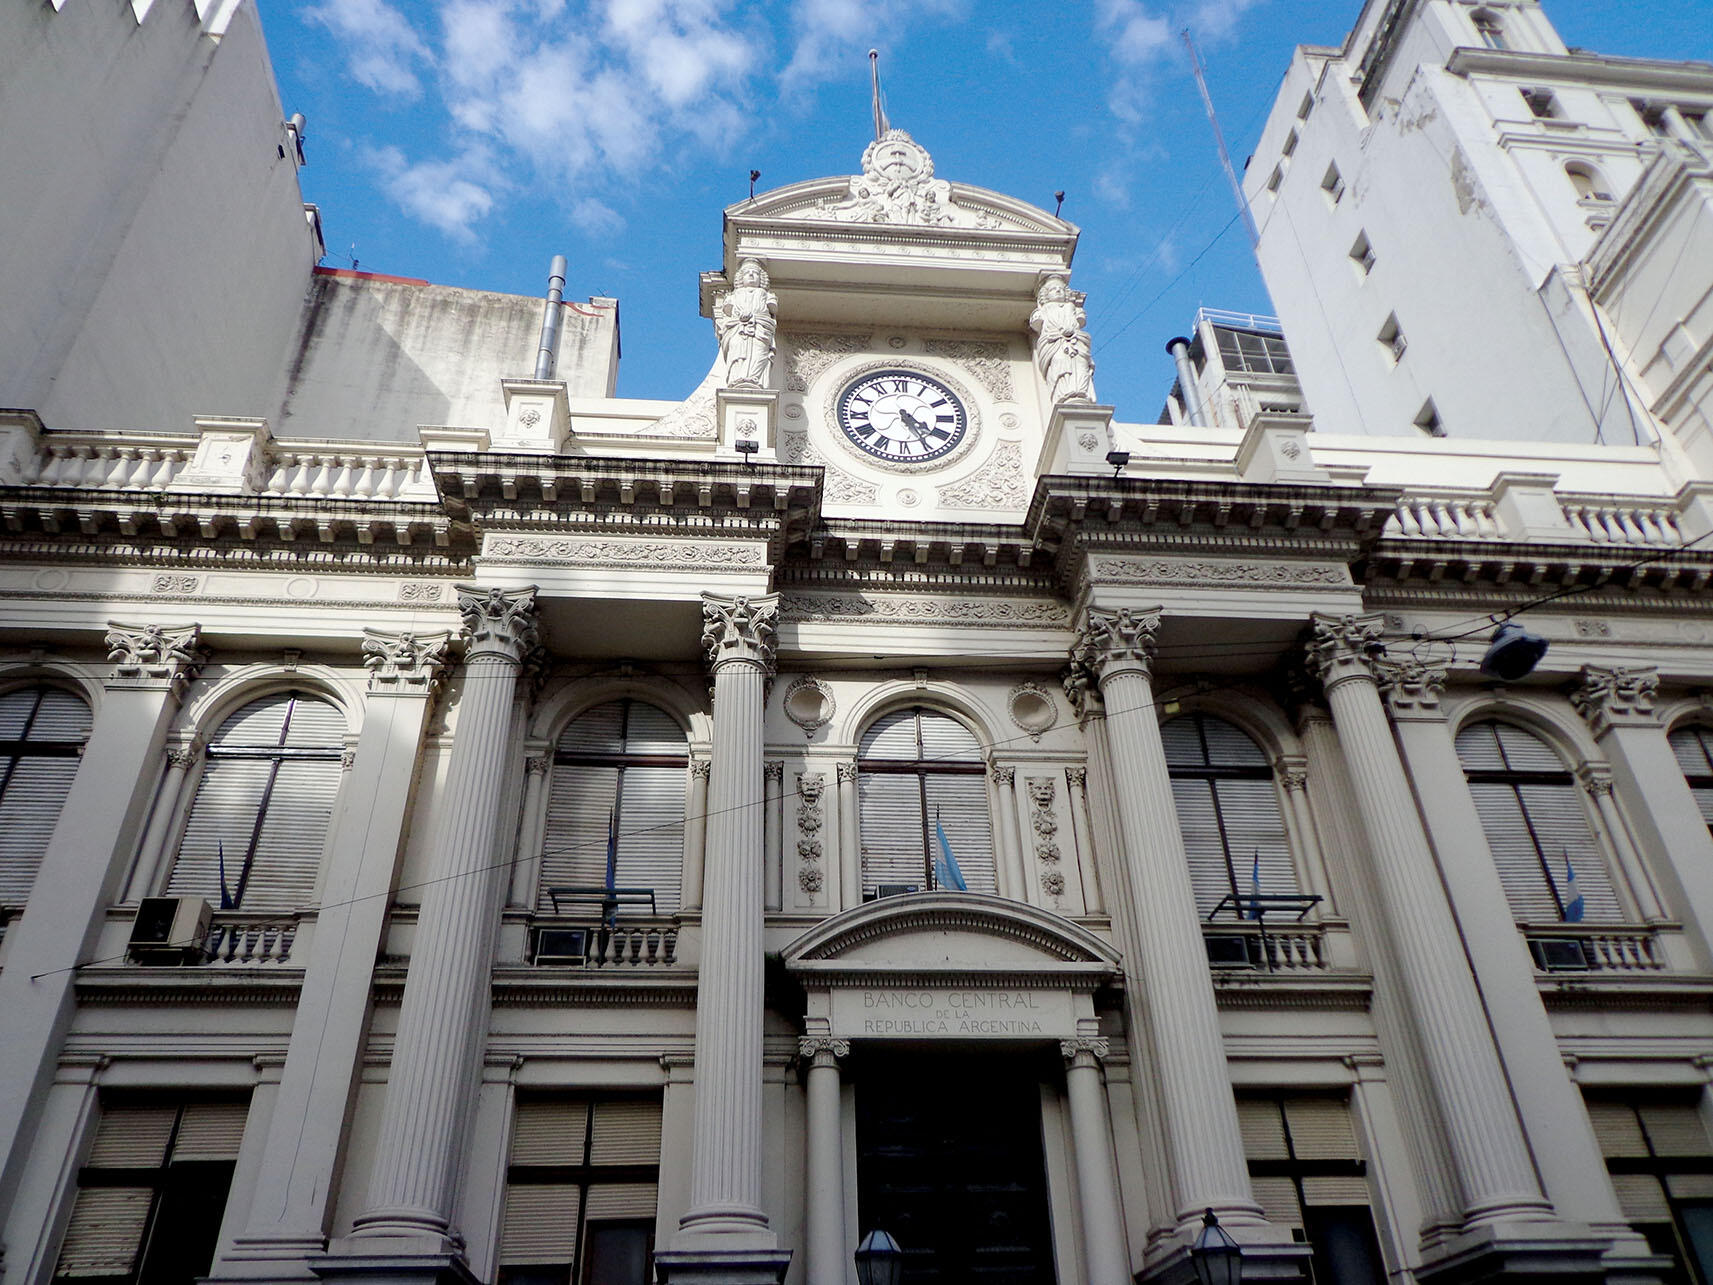 The Central Bank of Argentina, an imposing classical building in Buenos Aires. (Photo by Diana2803.)